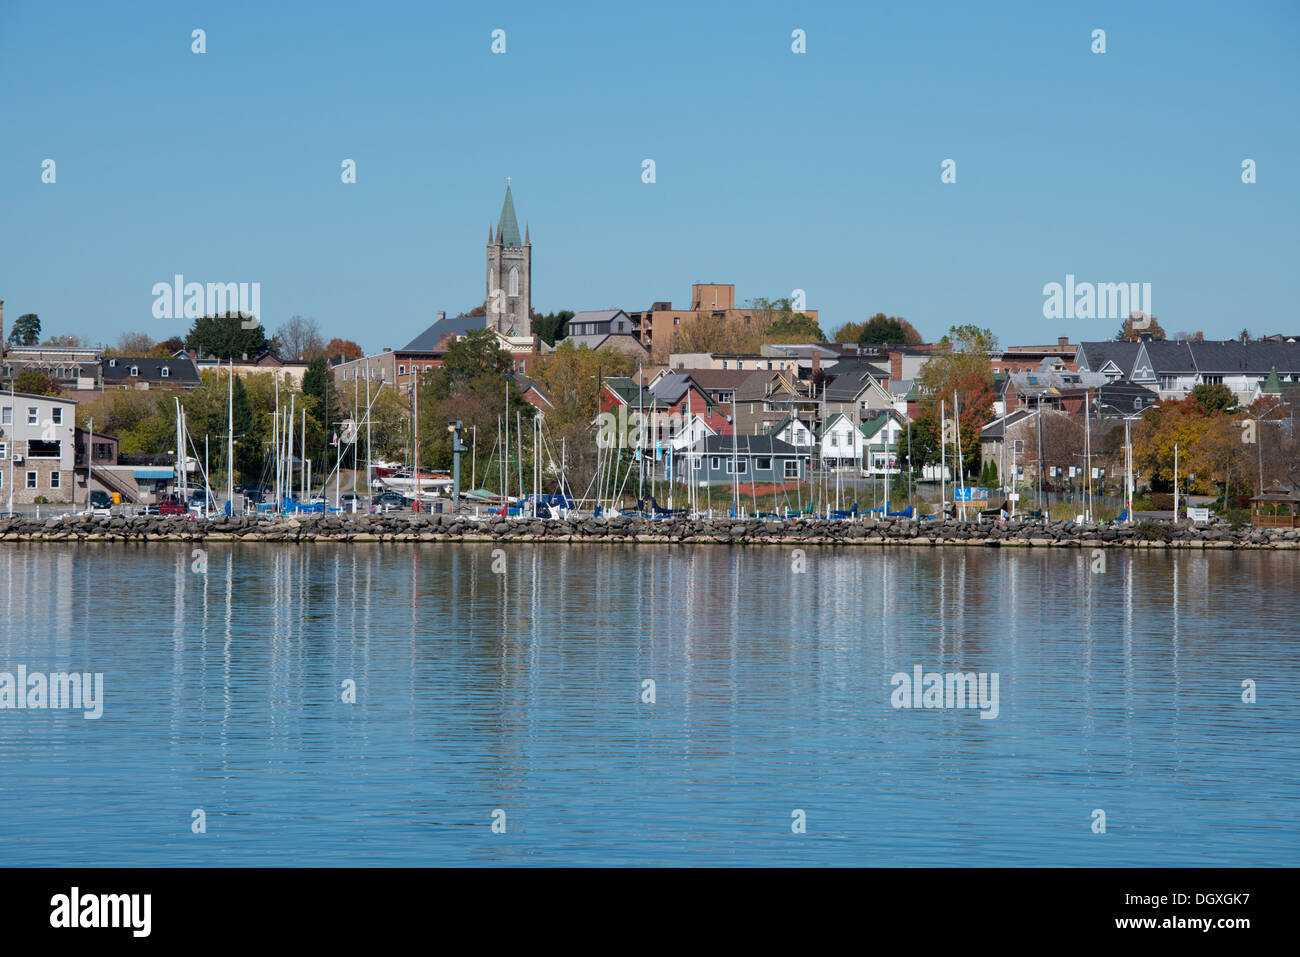 Canada, Ontario, Brockville. Historic town along the Saint Lawrence Seaway. Stock Photo